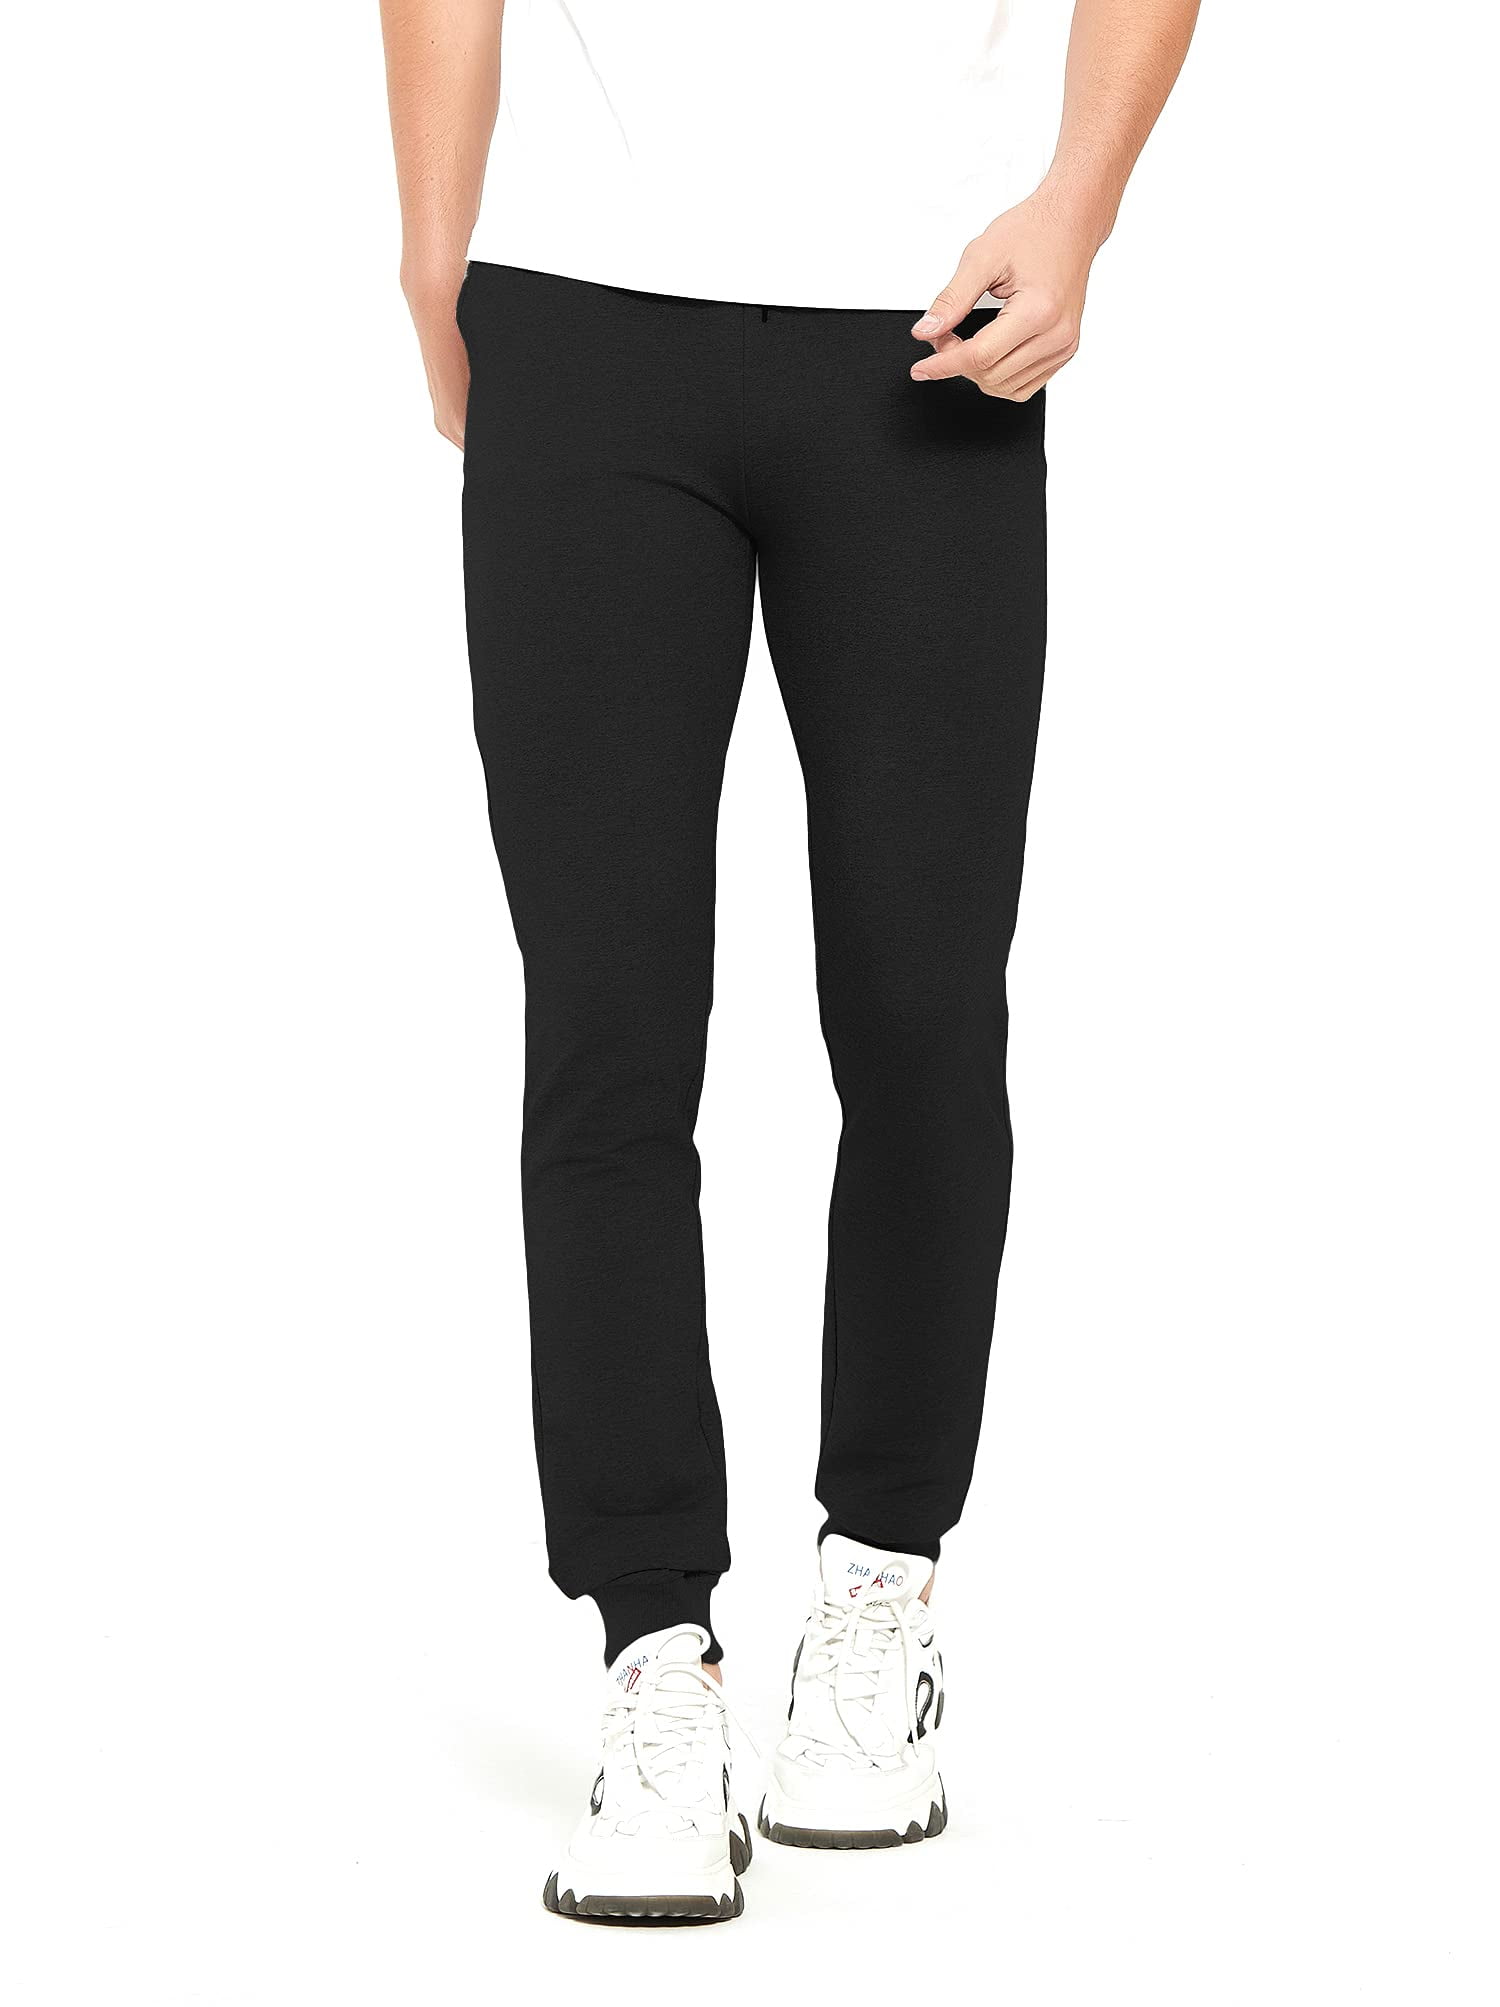 Idtswch 34/36/38/40 Long Inseam Men's Tall Yoga Sweatpants Open Bottom  Joggers Casual Loose Fit Athletic Pants with Pockets Tall(34inseam)  X-Large Black